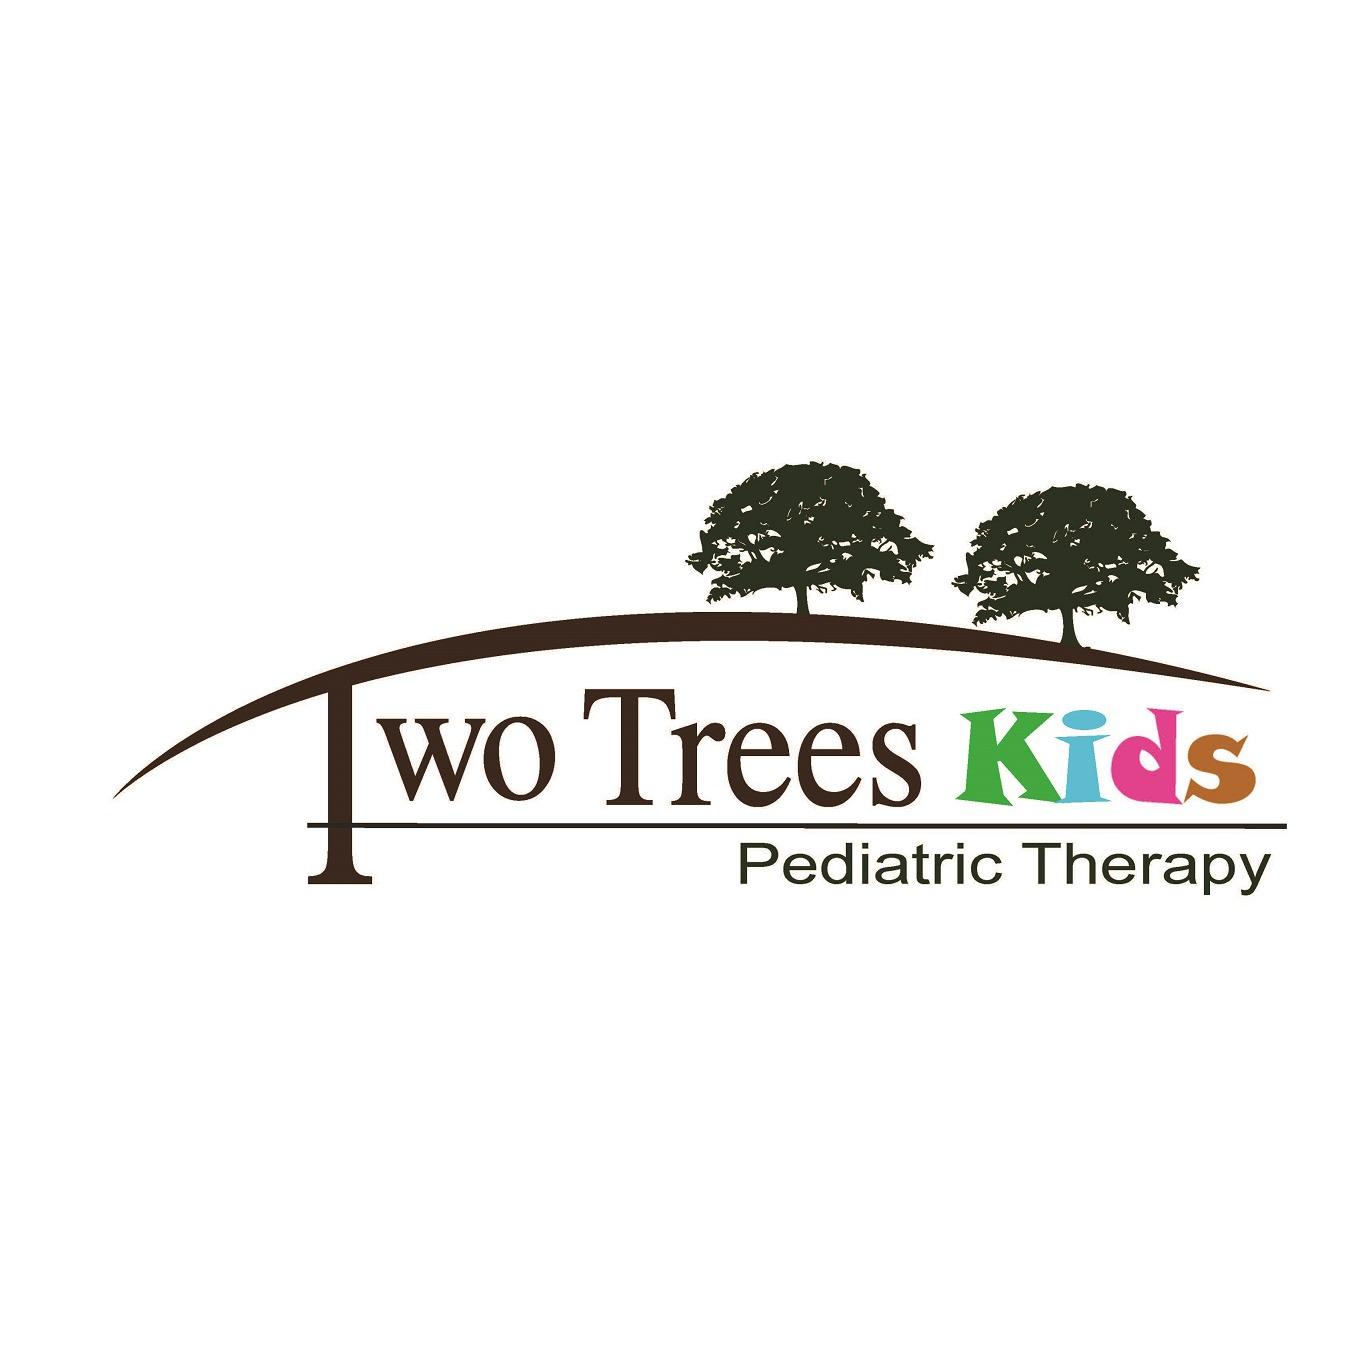 Two Trees Kids